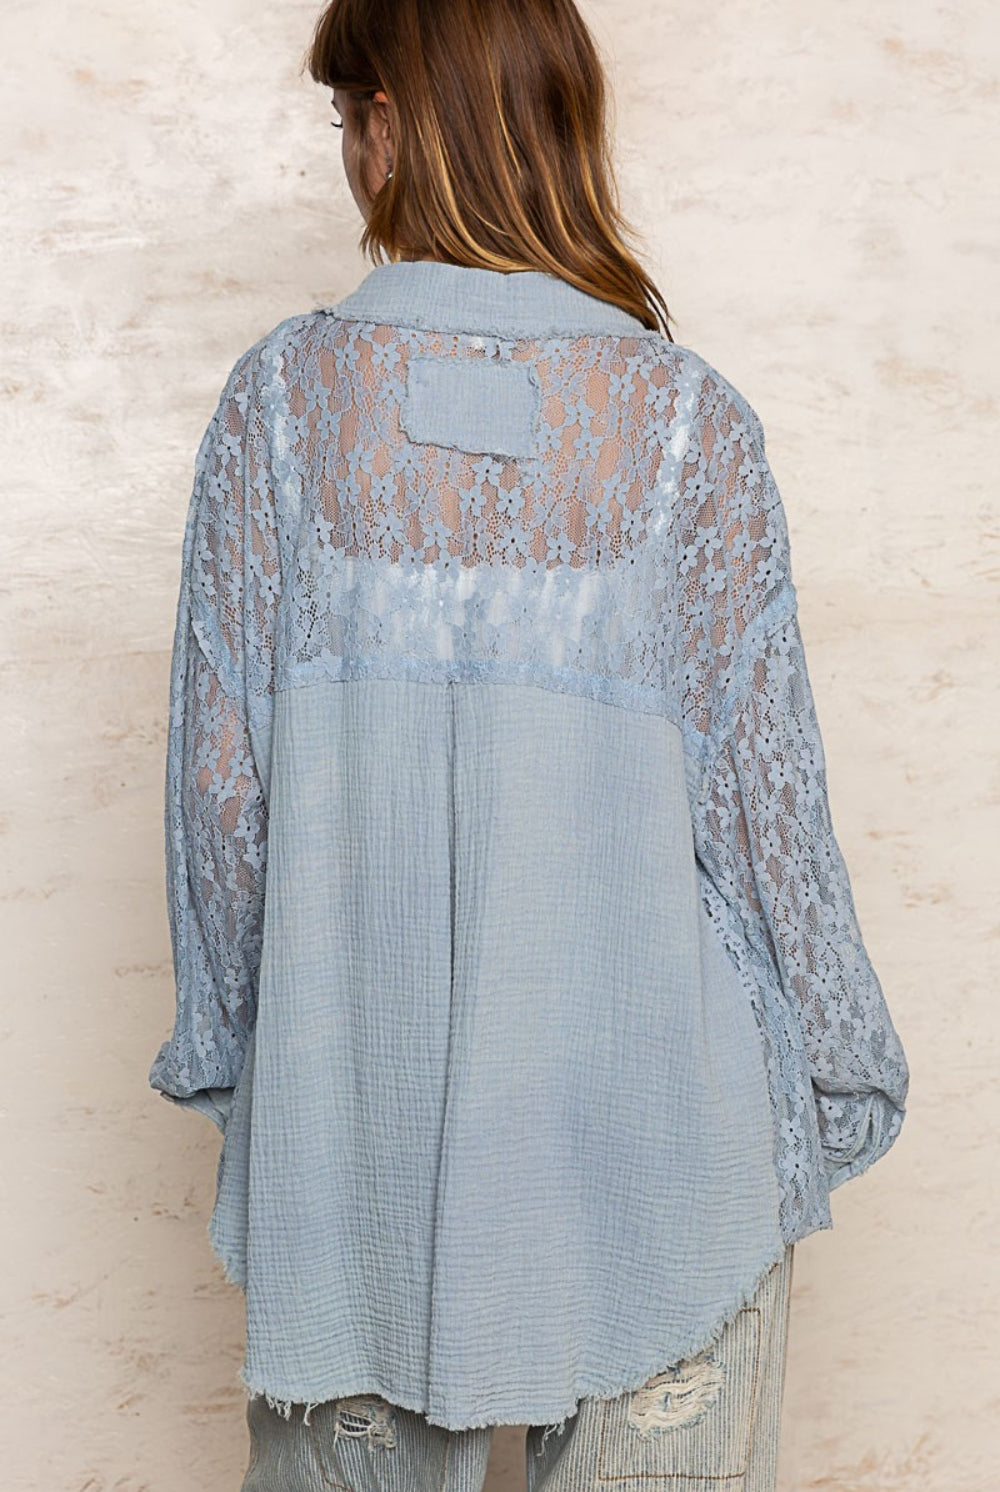 A woman in a delicate light blue lace button-down shirt, combining classic elegance with modern lace detailing for a sophisticated look.